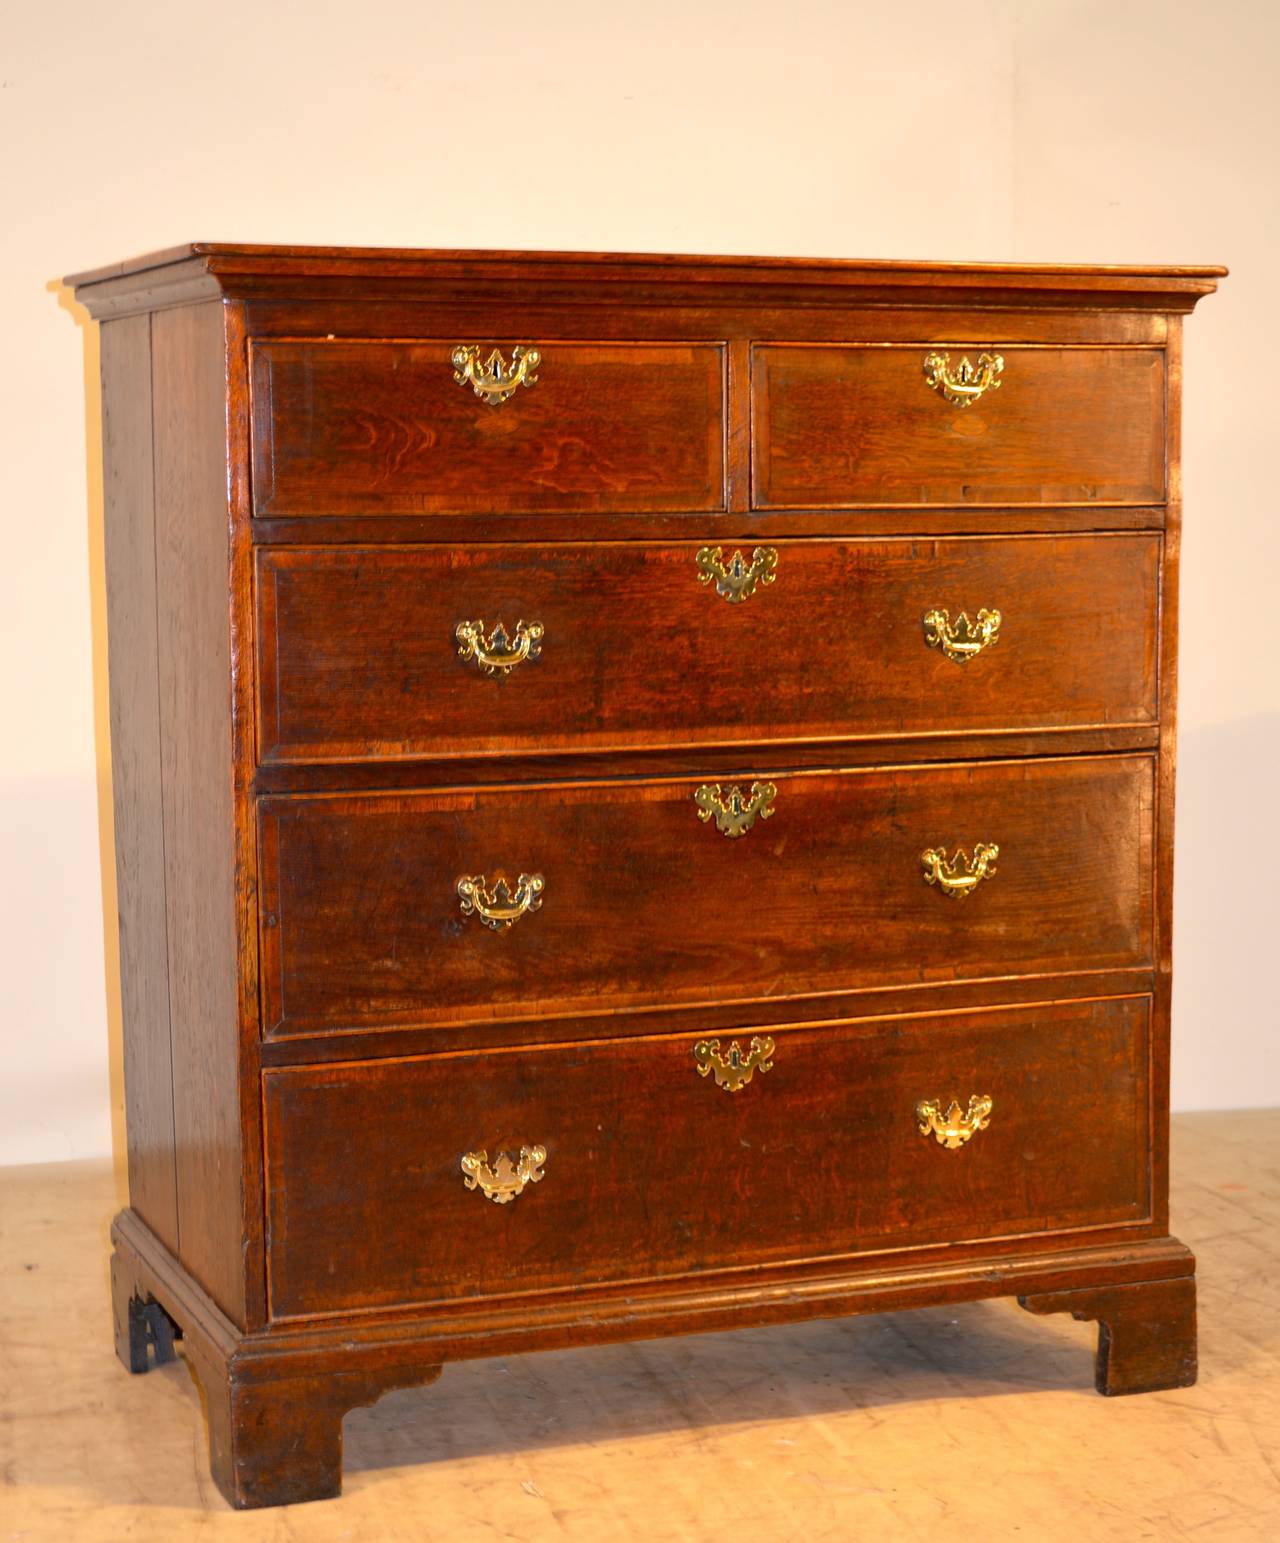 18th Century Georgian oak tall chest. It has a two board top, following down to a two over three drawer configuration. The top drawers have small plugs where hardware has been moved or replaced at some time. Raised on nice tall bracket feet.